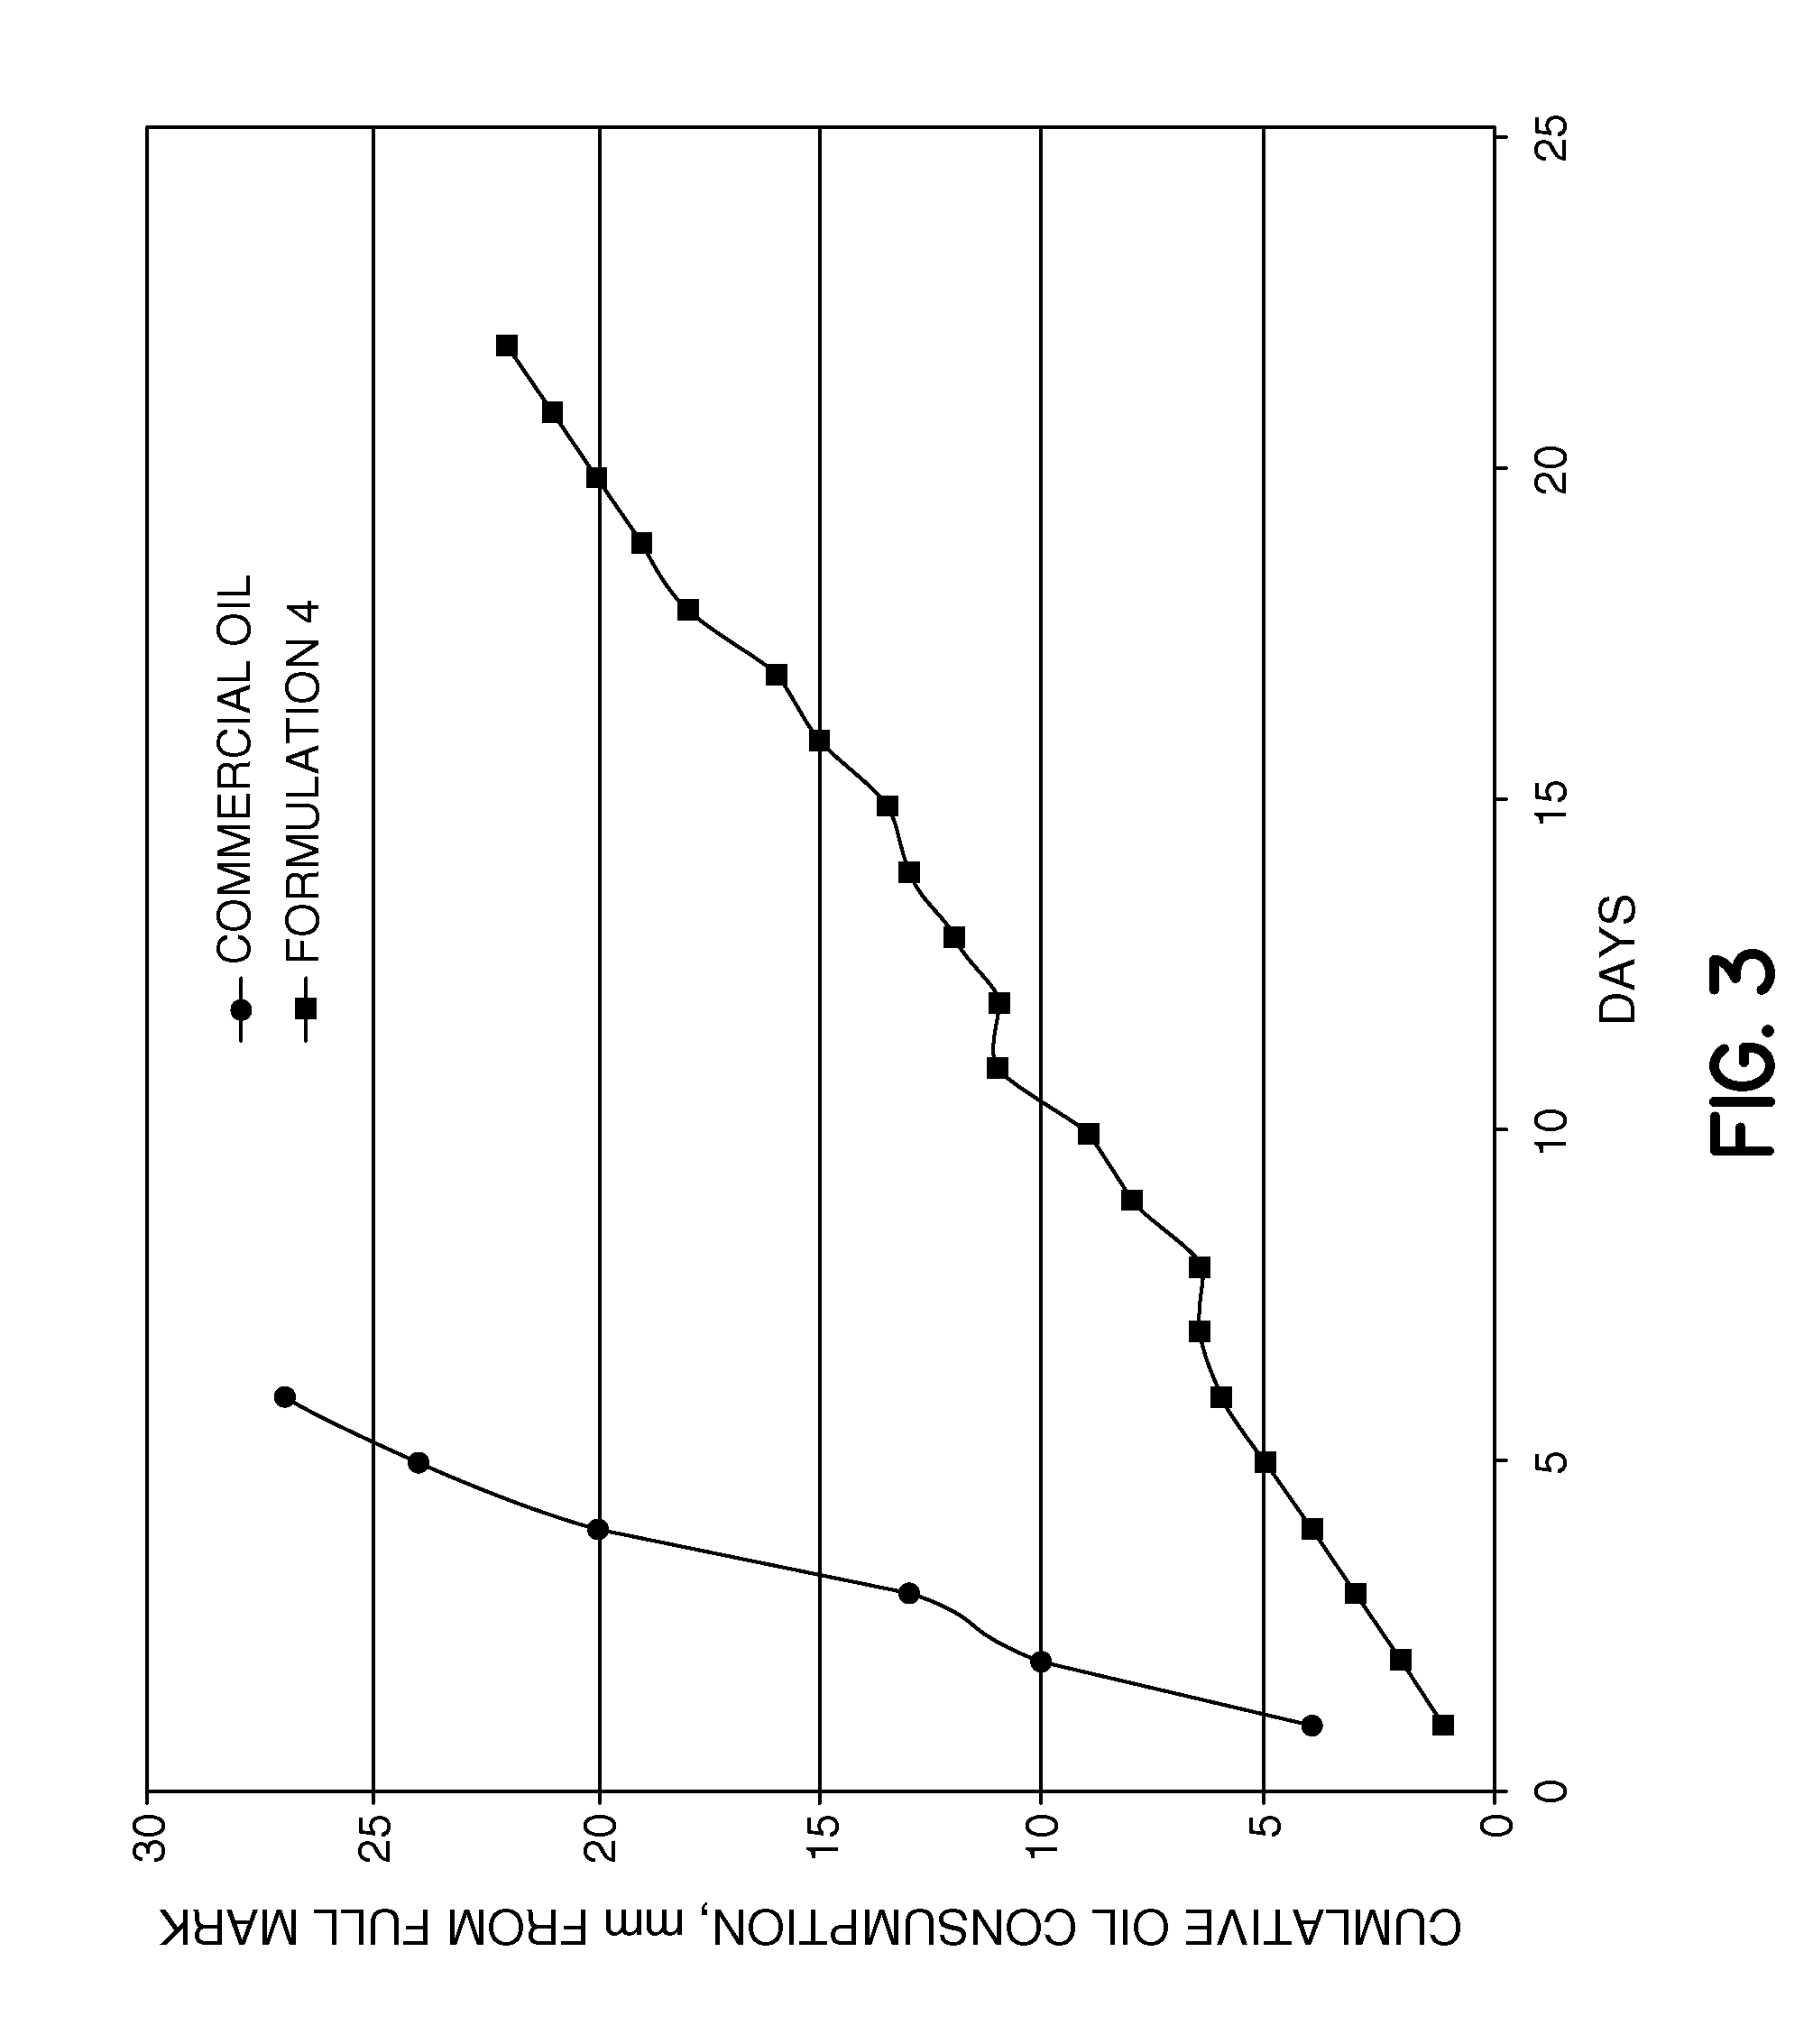 Lubricant for preventing and removing carbon deposits in internal combustion engines